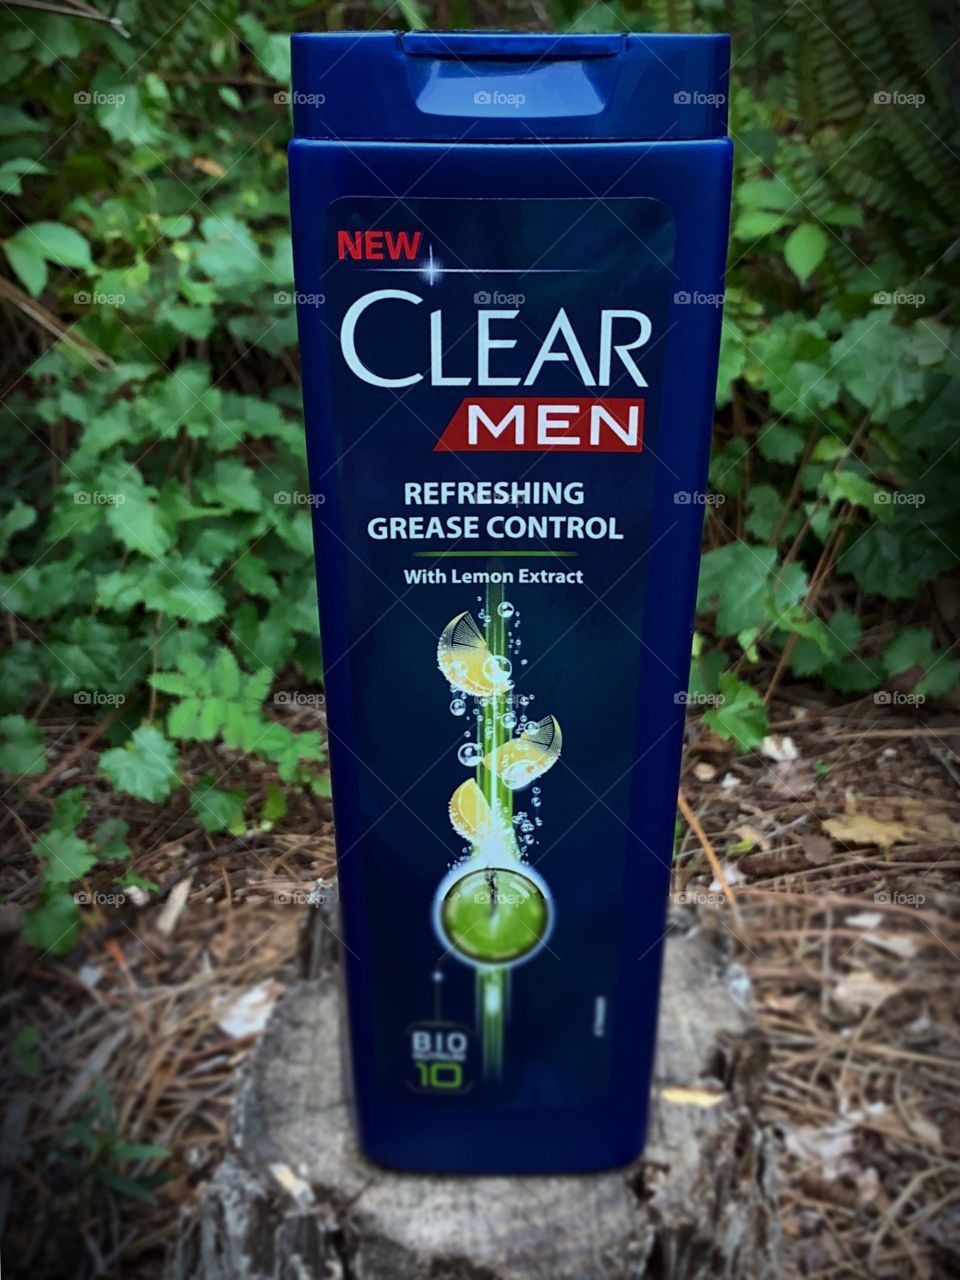 Clear shampoo for Men.